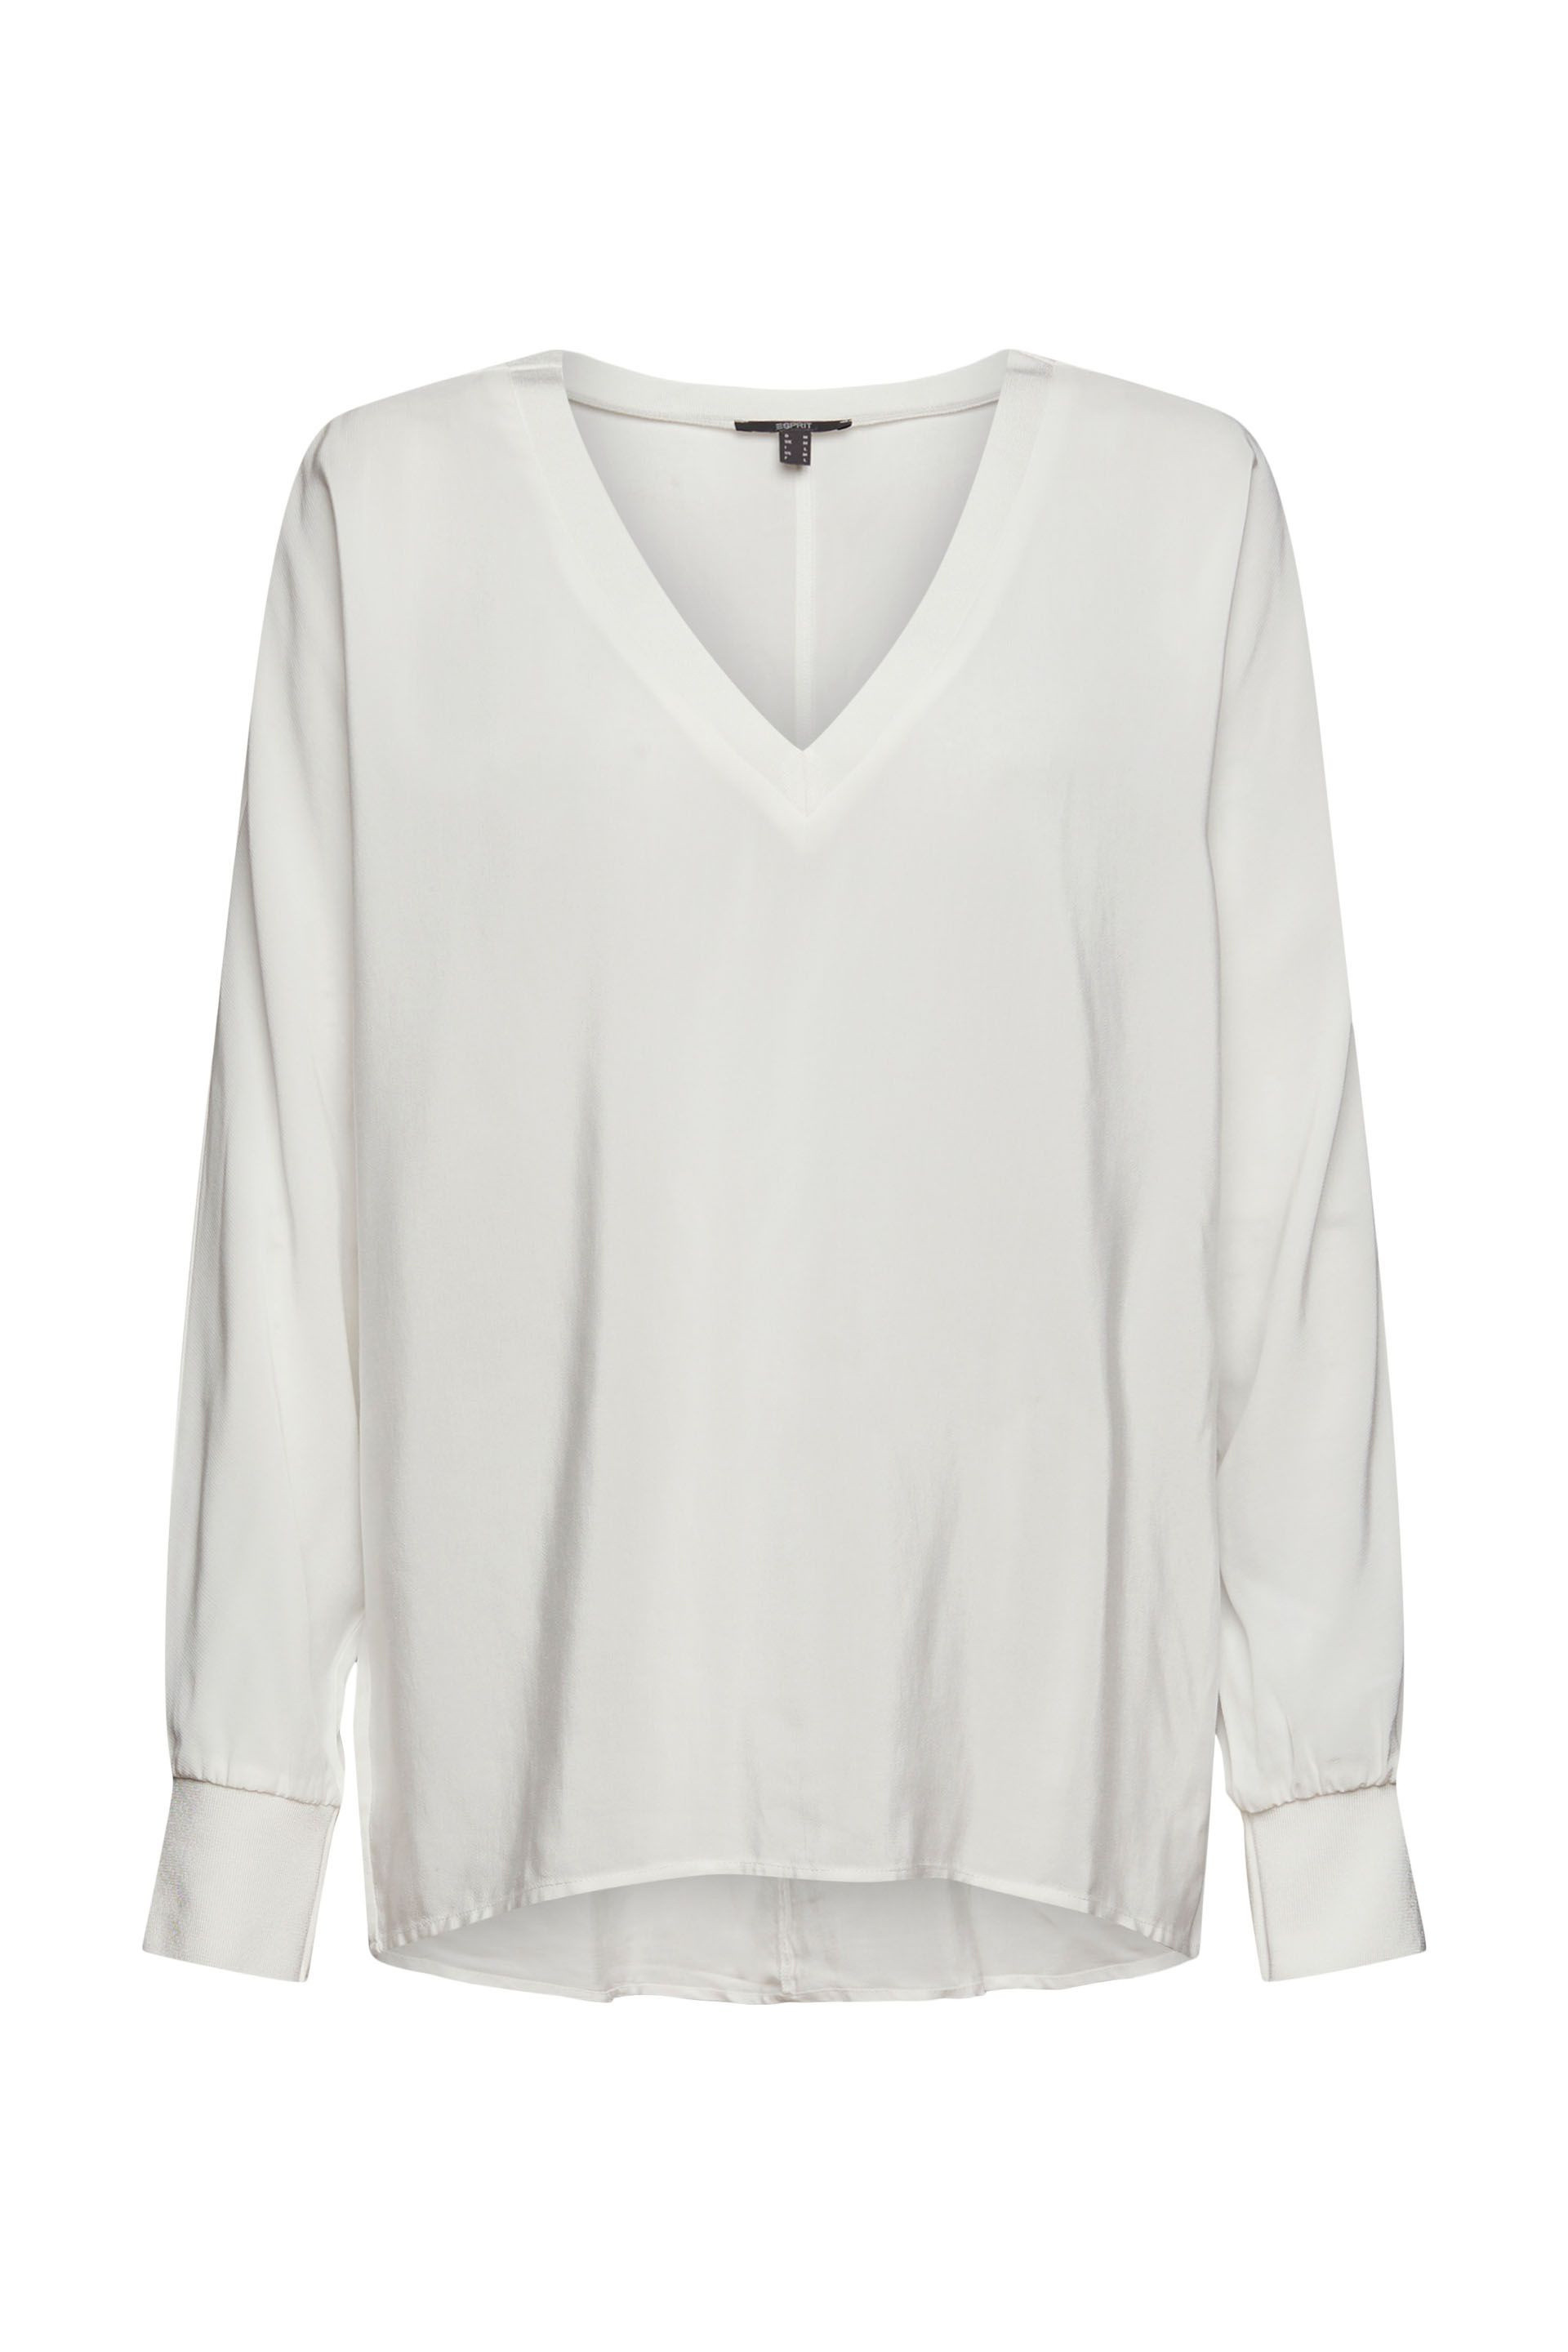 Blouse with sporty edges in ribbed knit, White, large image number 0